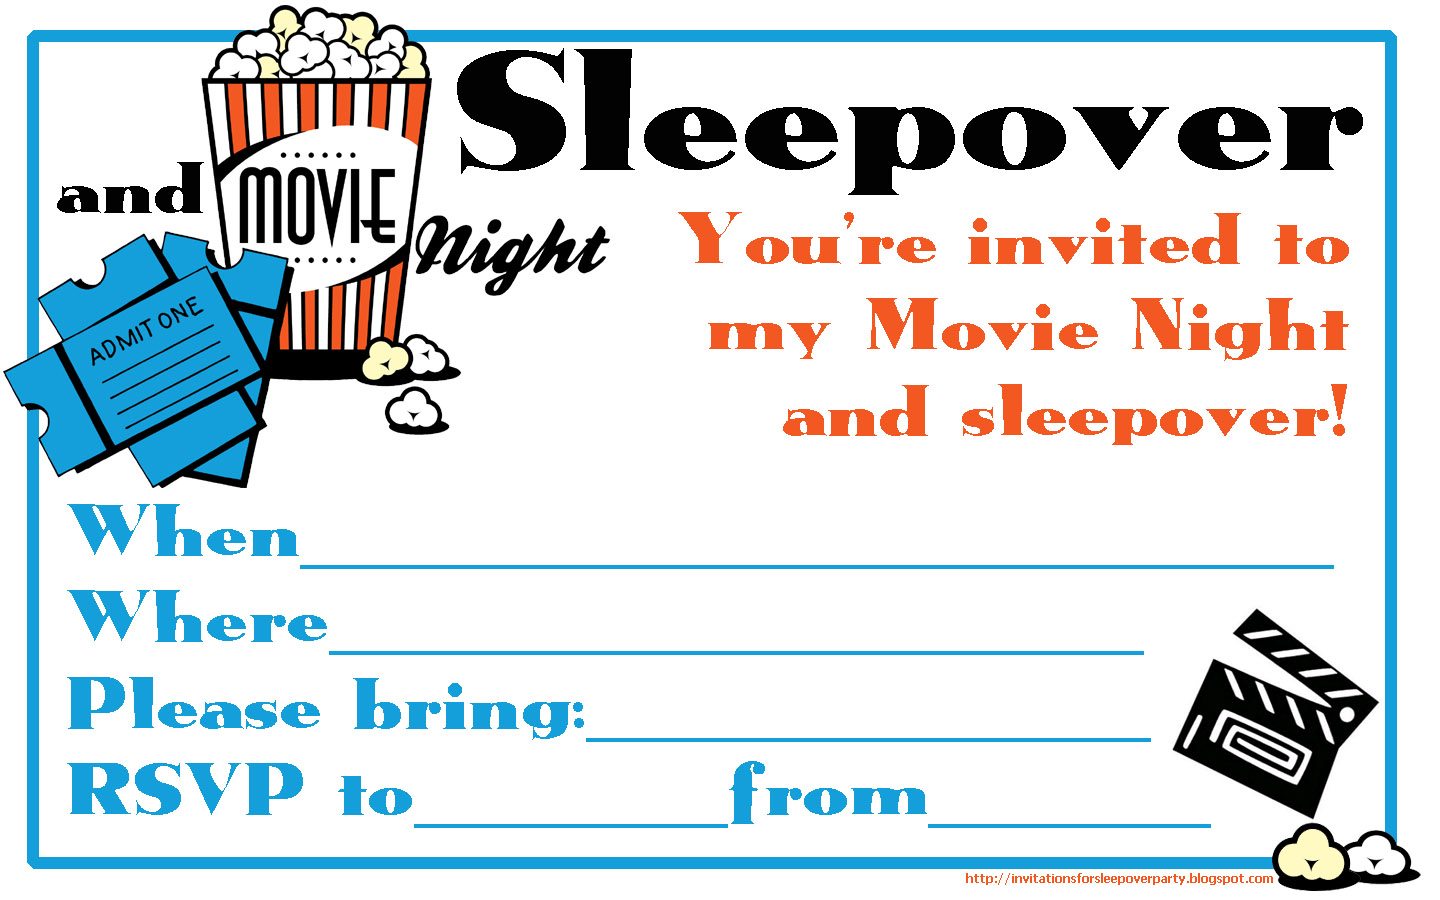 invitations-for-sleepover-party-fill-in-the-blanks-invitation-to-a